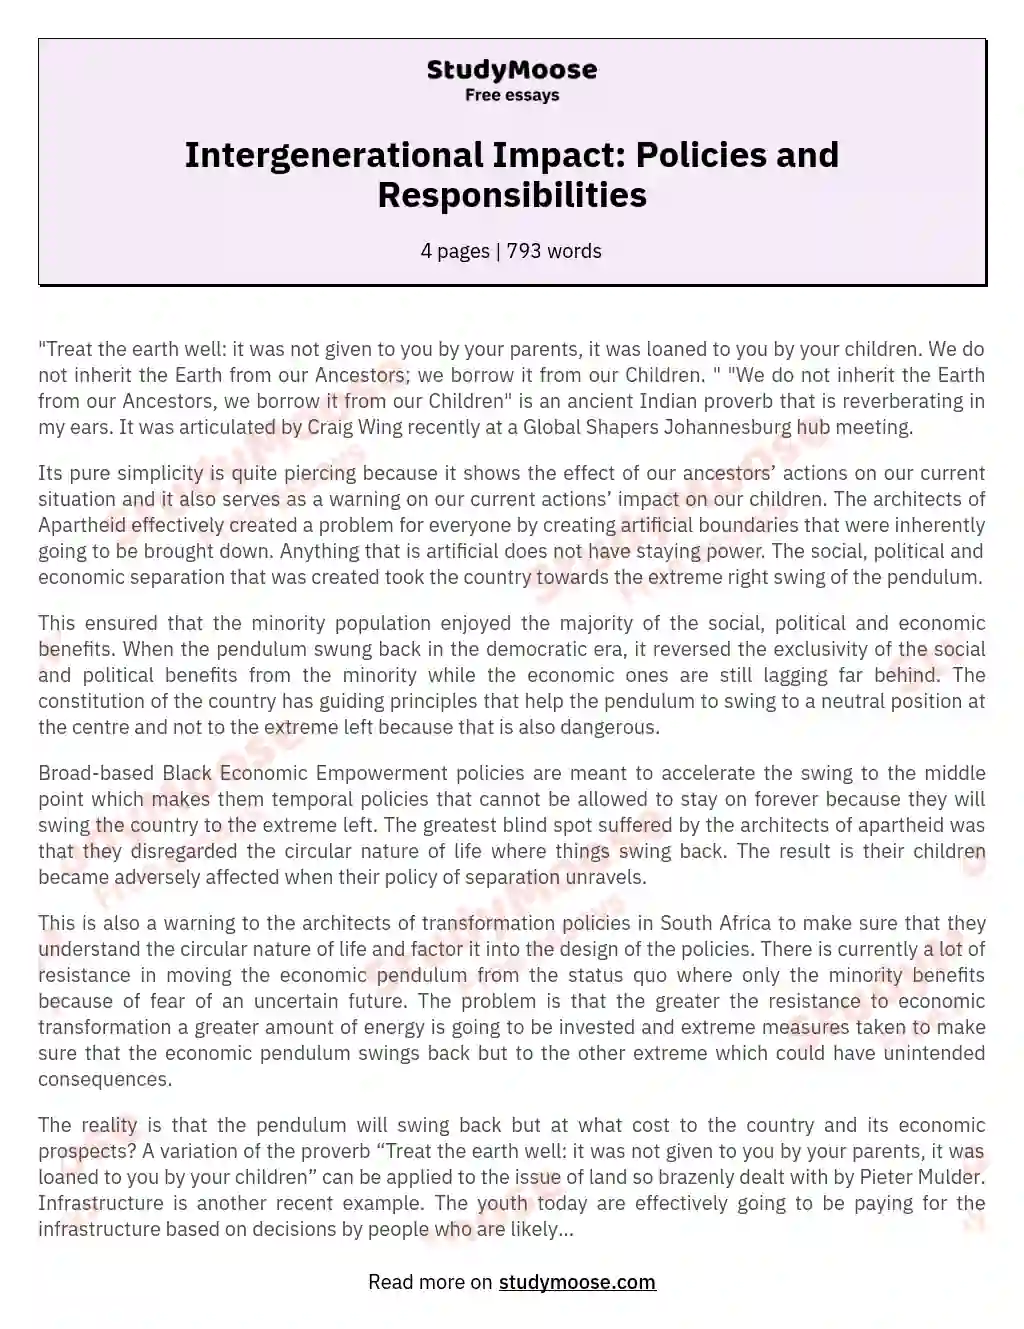 Intergenerational Impact: Policies and Responsibilities essay